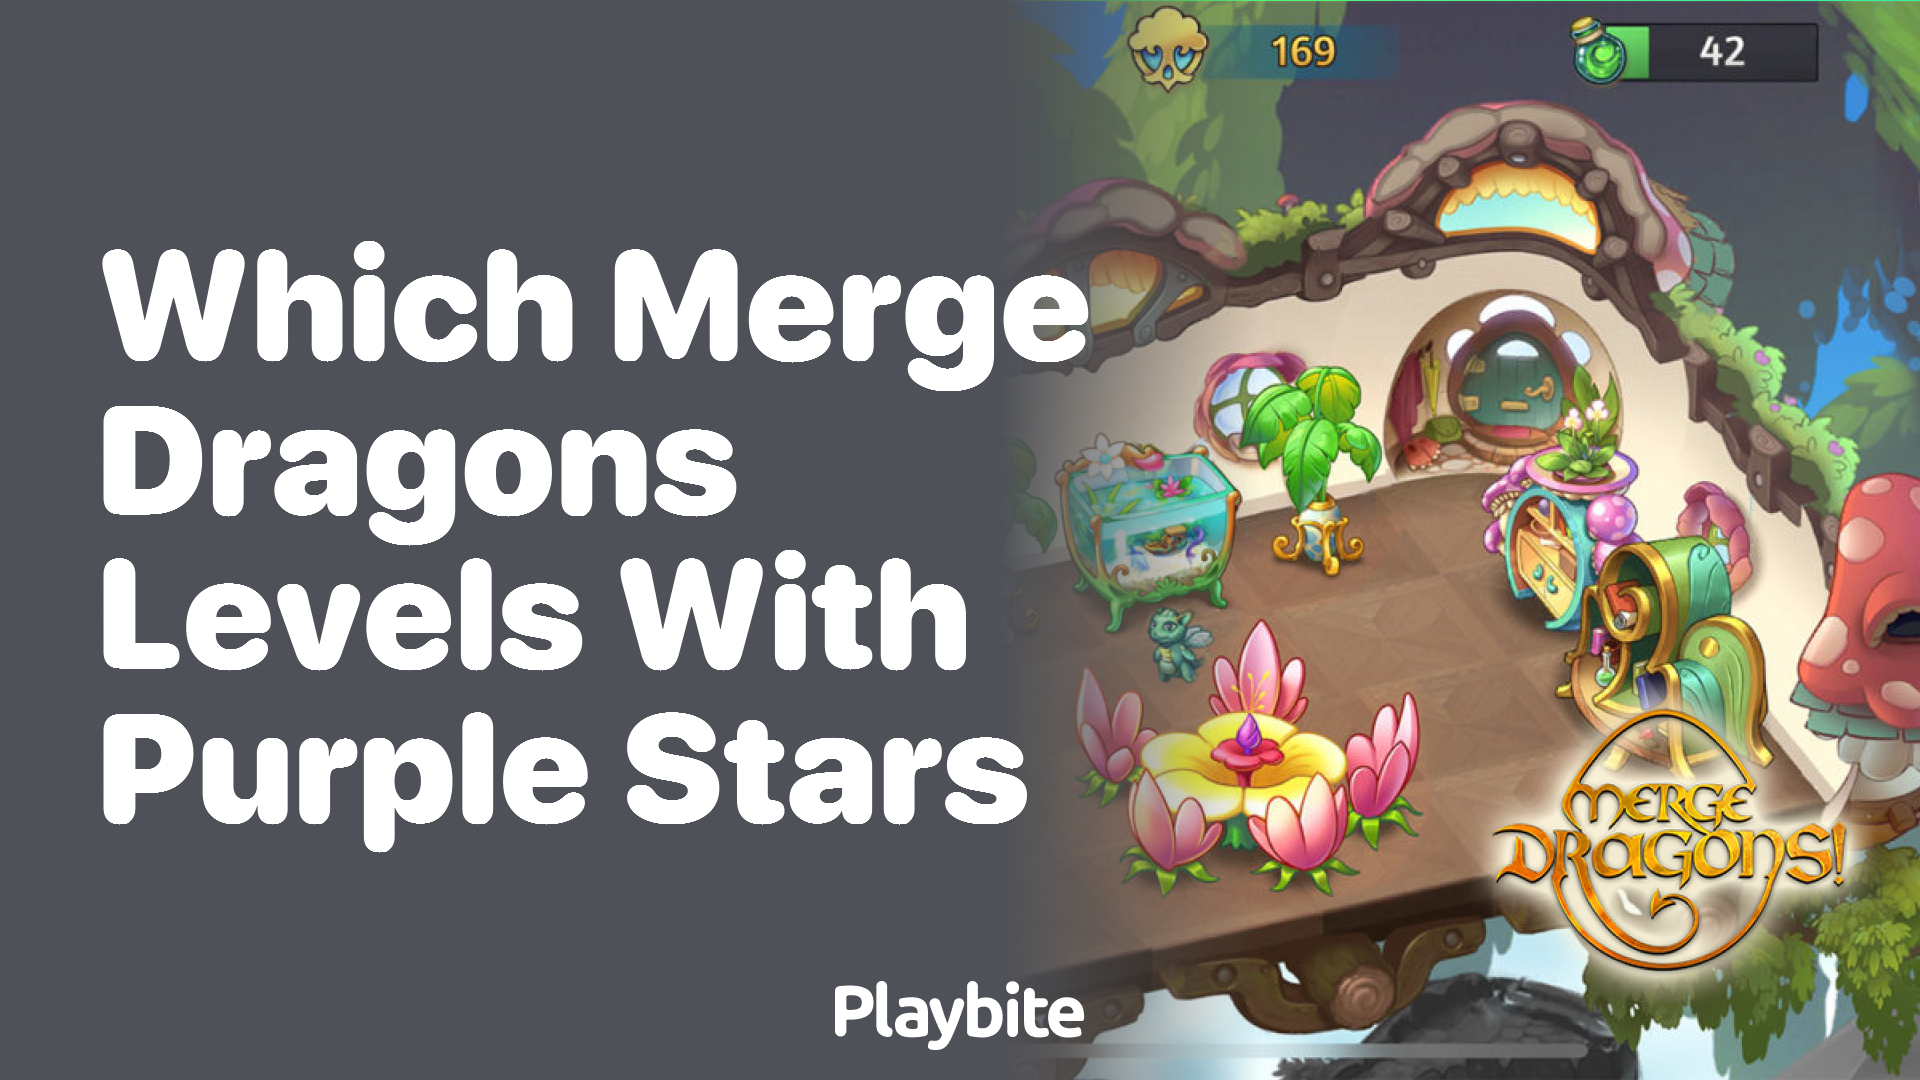 Which Merge Dragons levels drop purple stars?